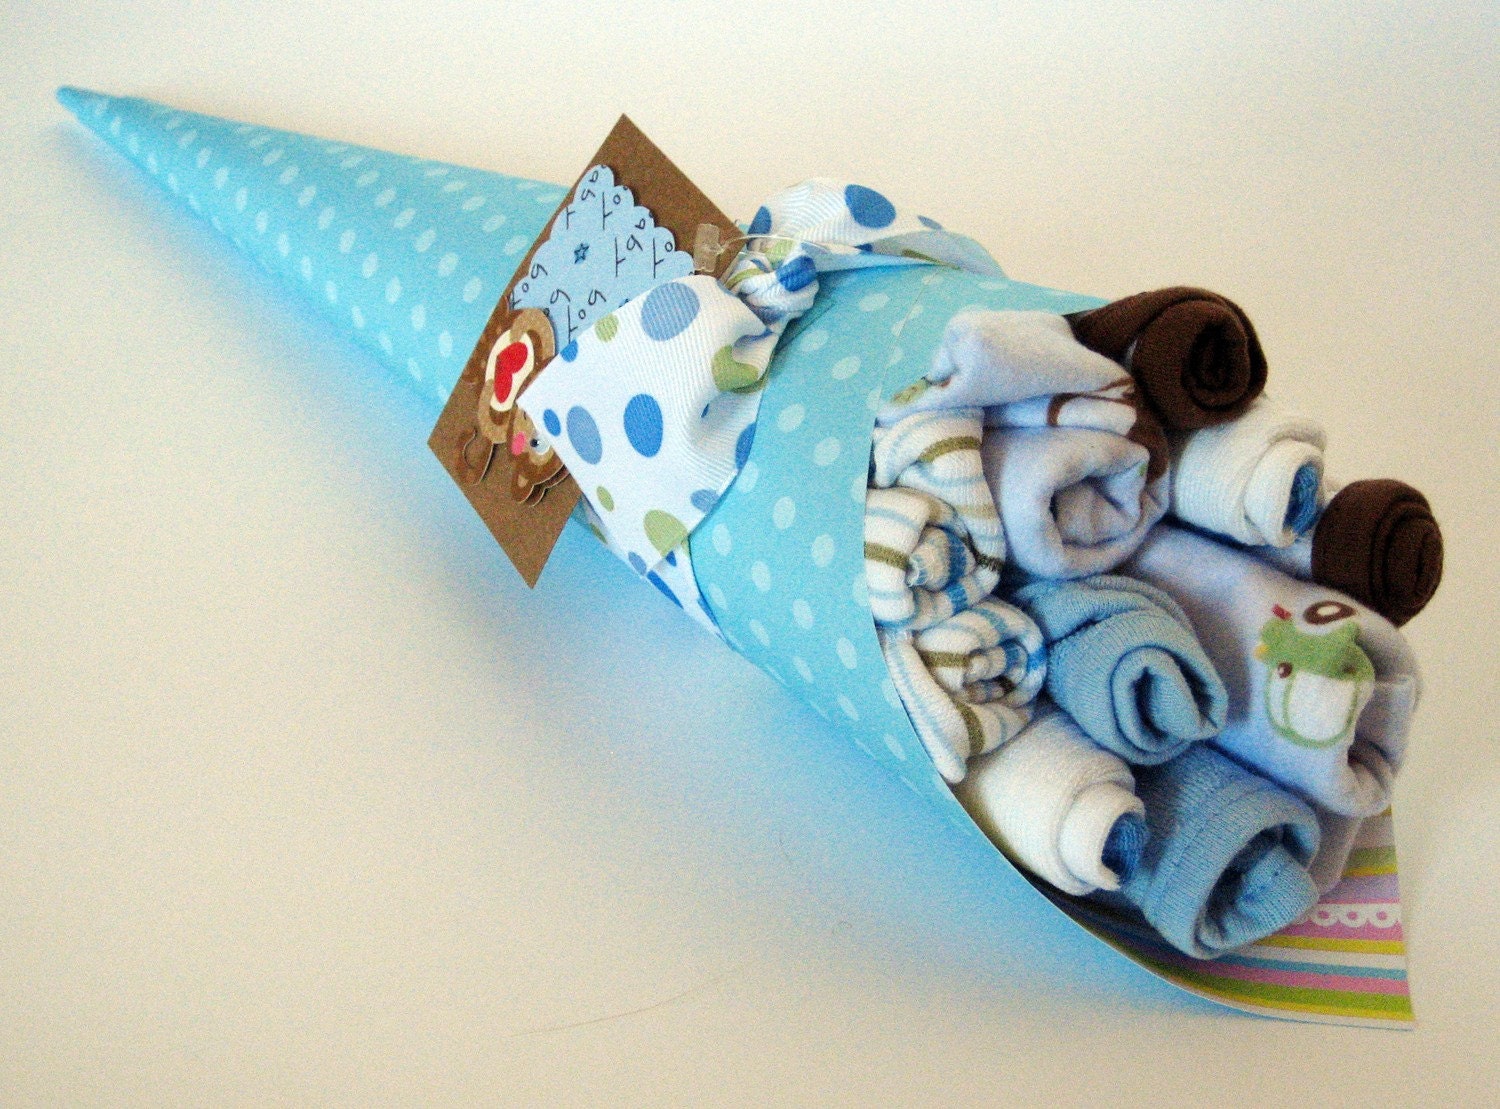 Baby bouquet - Baby shower gift - Filled with baby
items